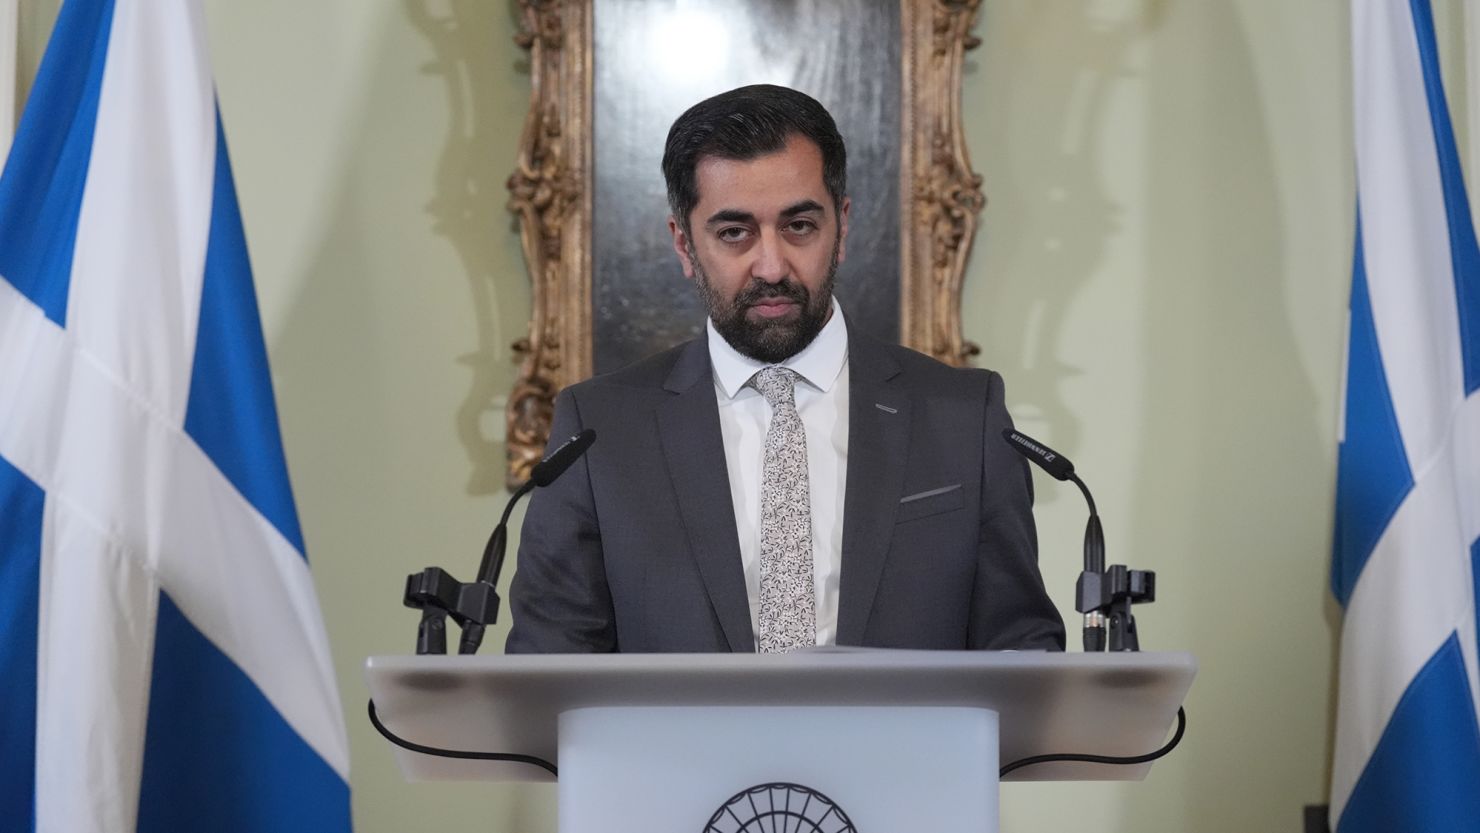 First Minister Humza Yousaf speaks during a news conference where his announced his resignation, in Edinburgh on April 29.